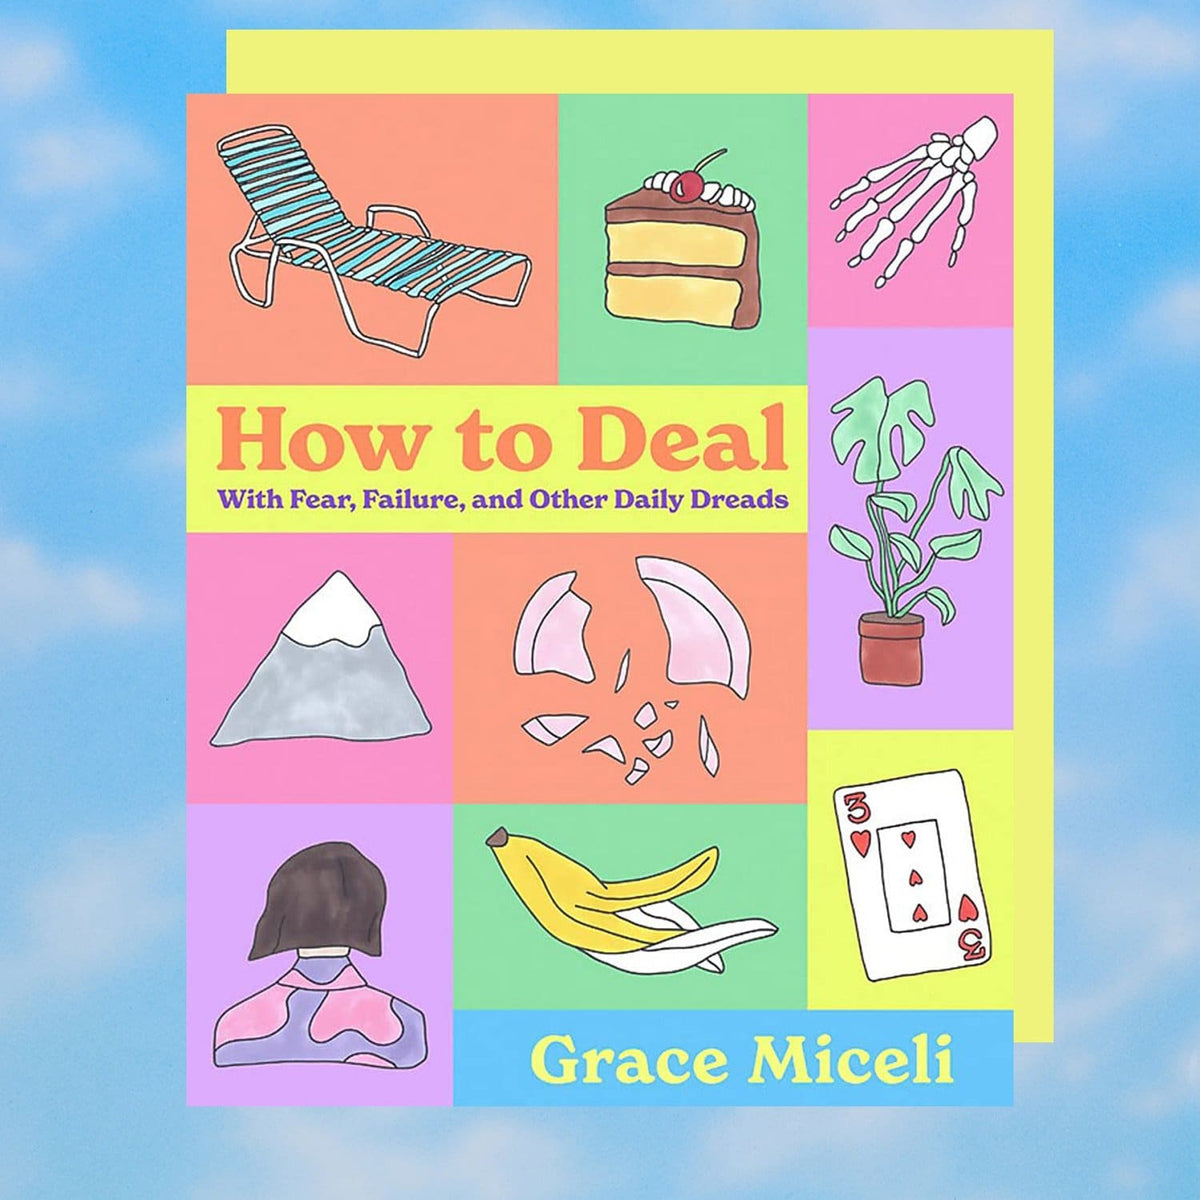 How to Deal by Grace Miceli Anxiety - Relief - Book Club - 